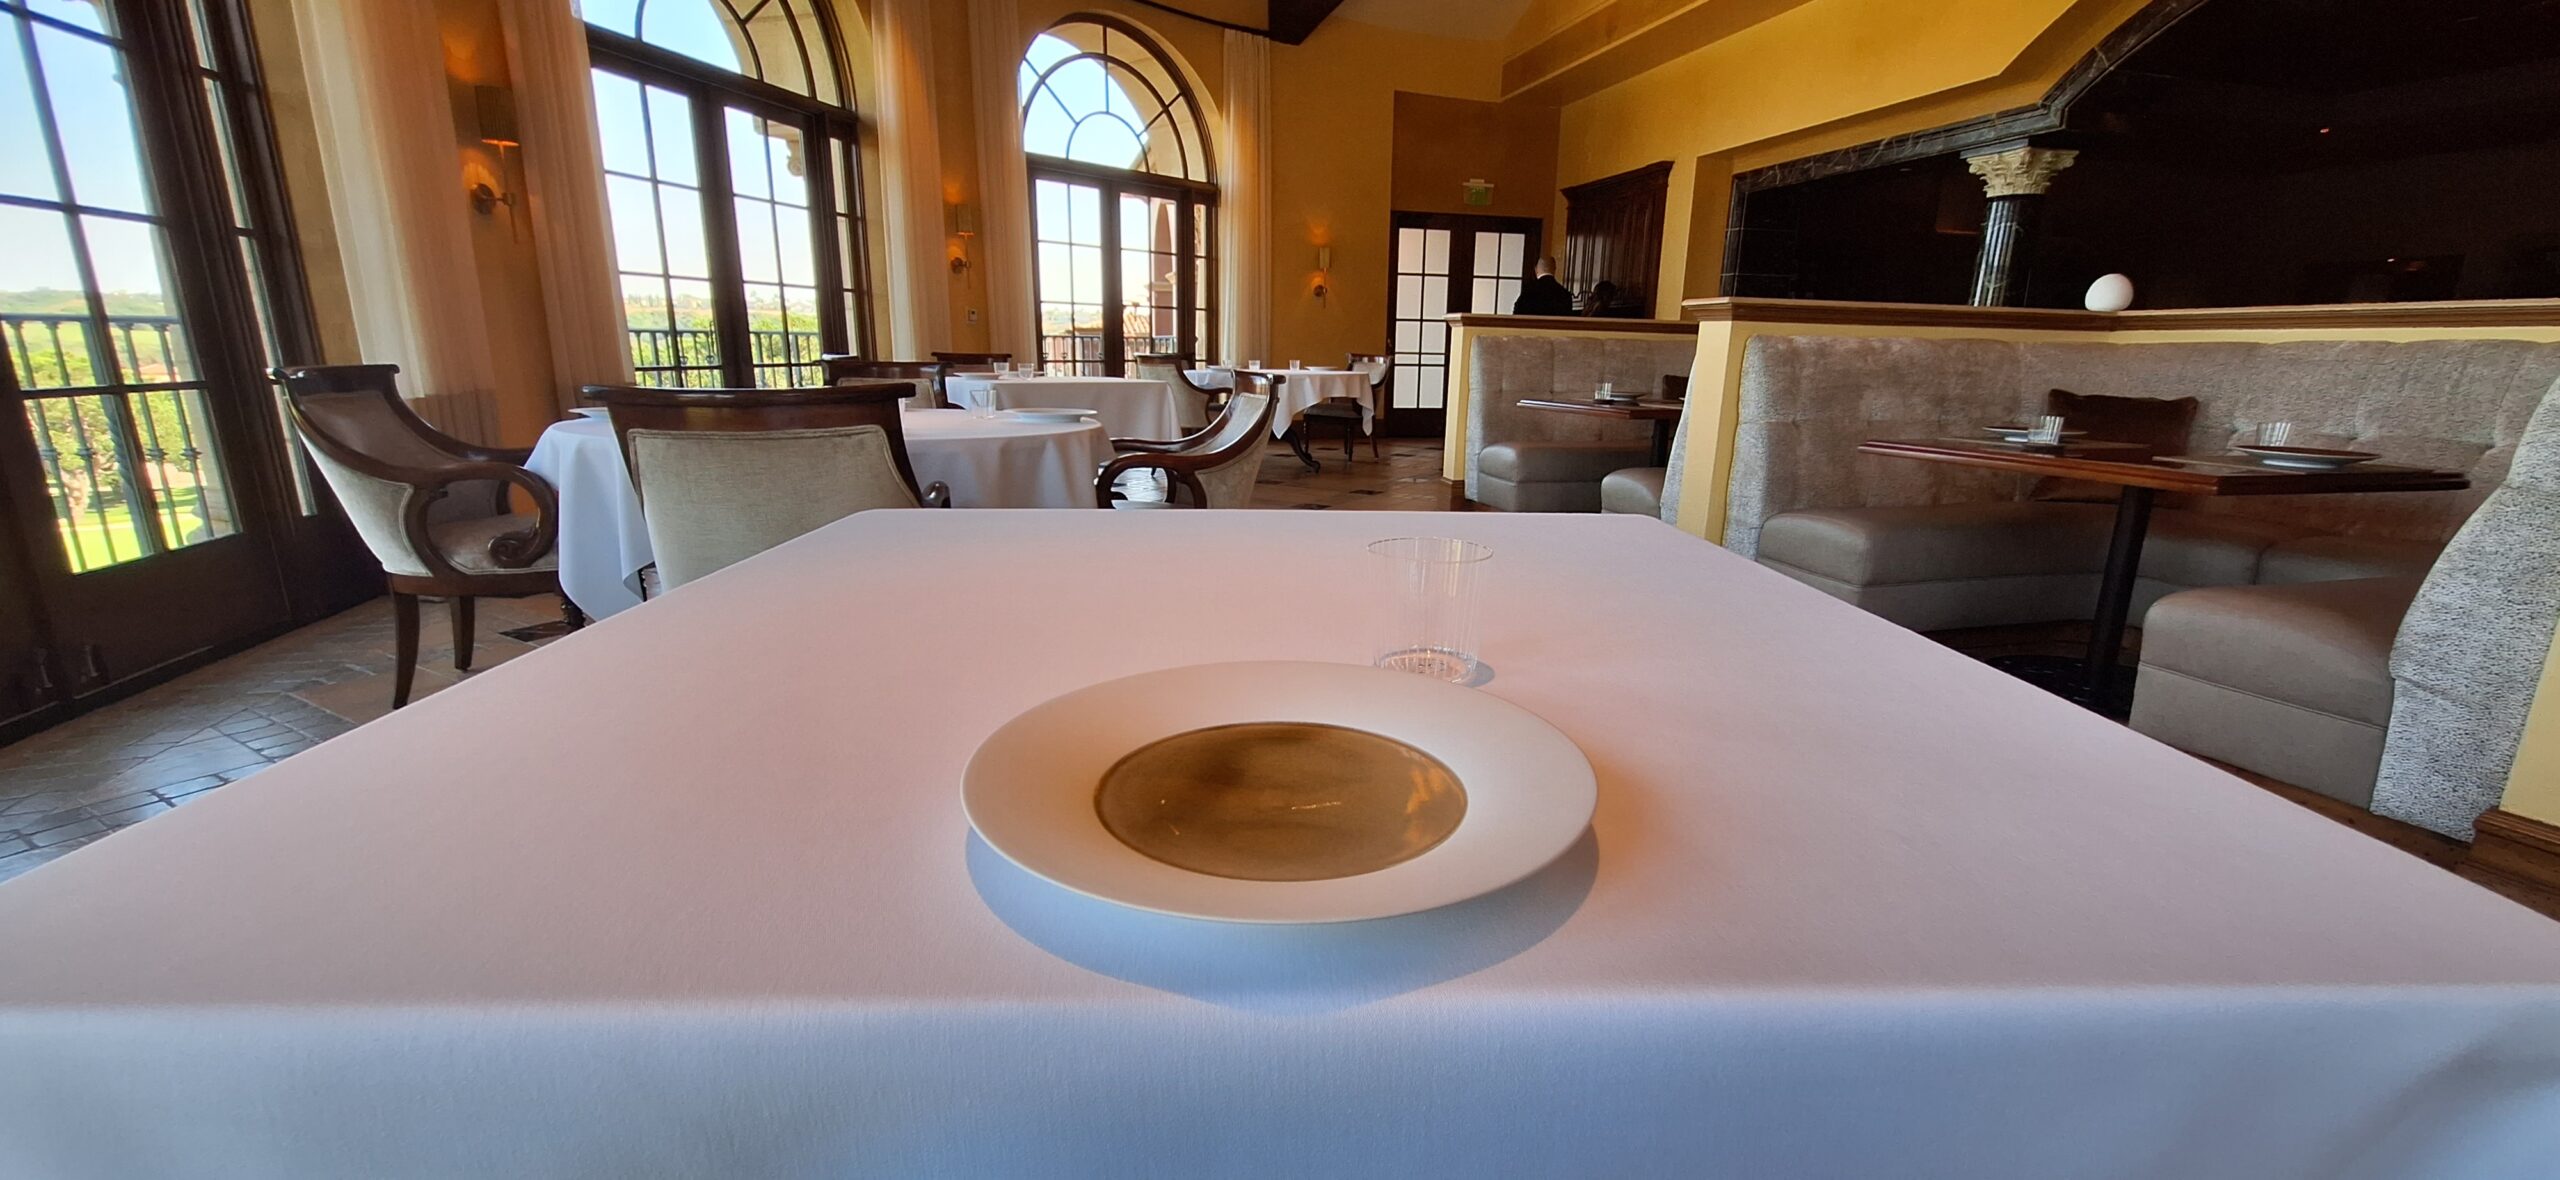 a white plate on a table with a white tablecloth